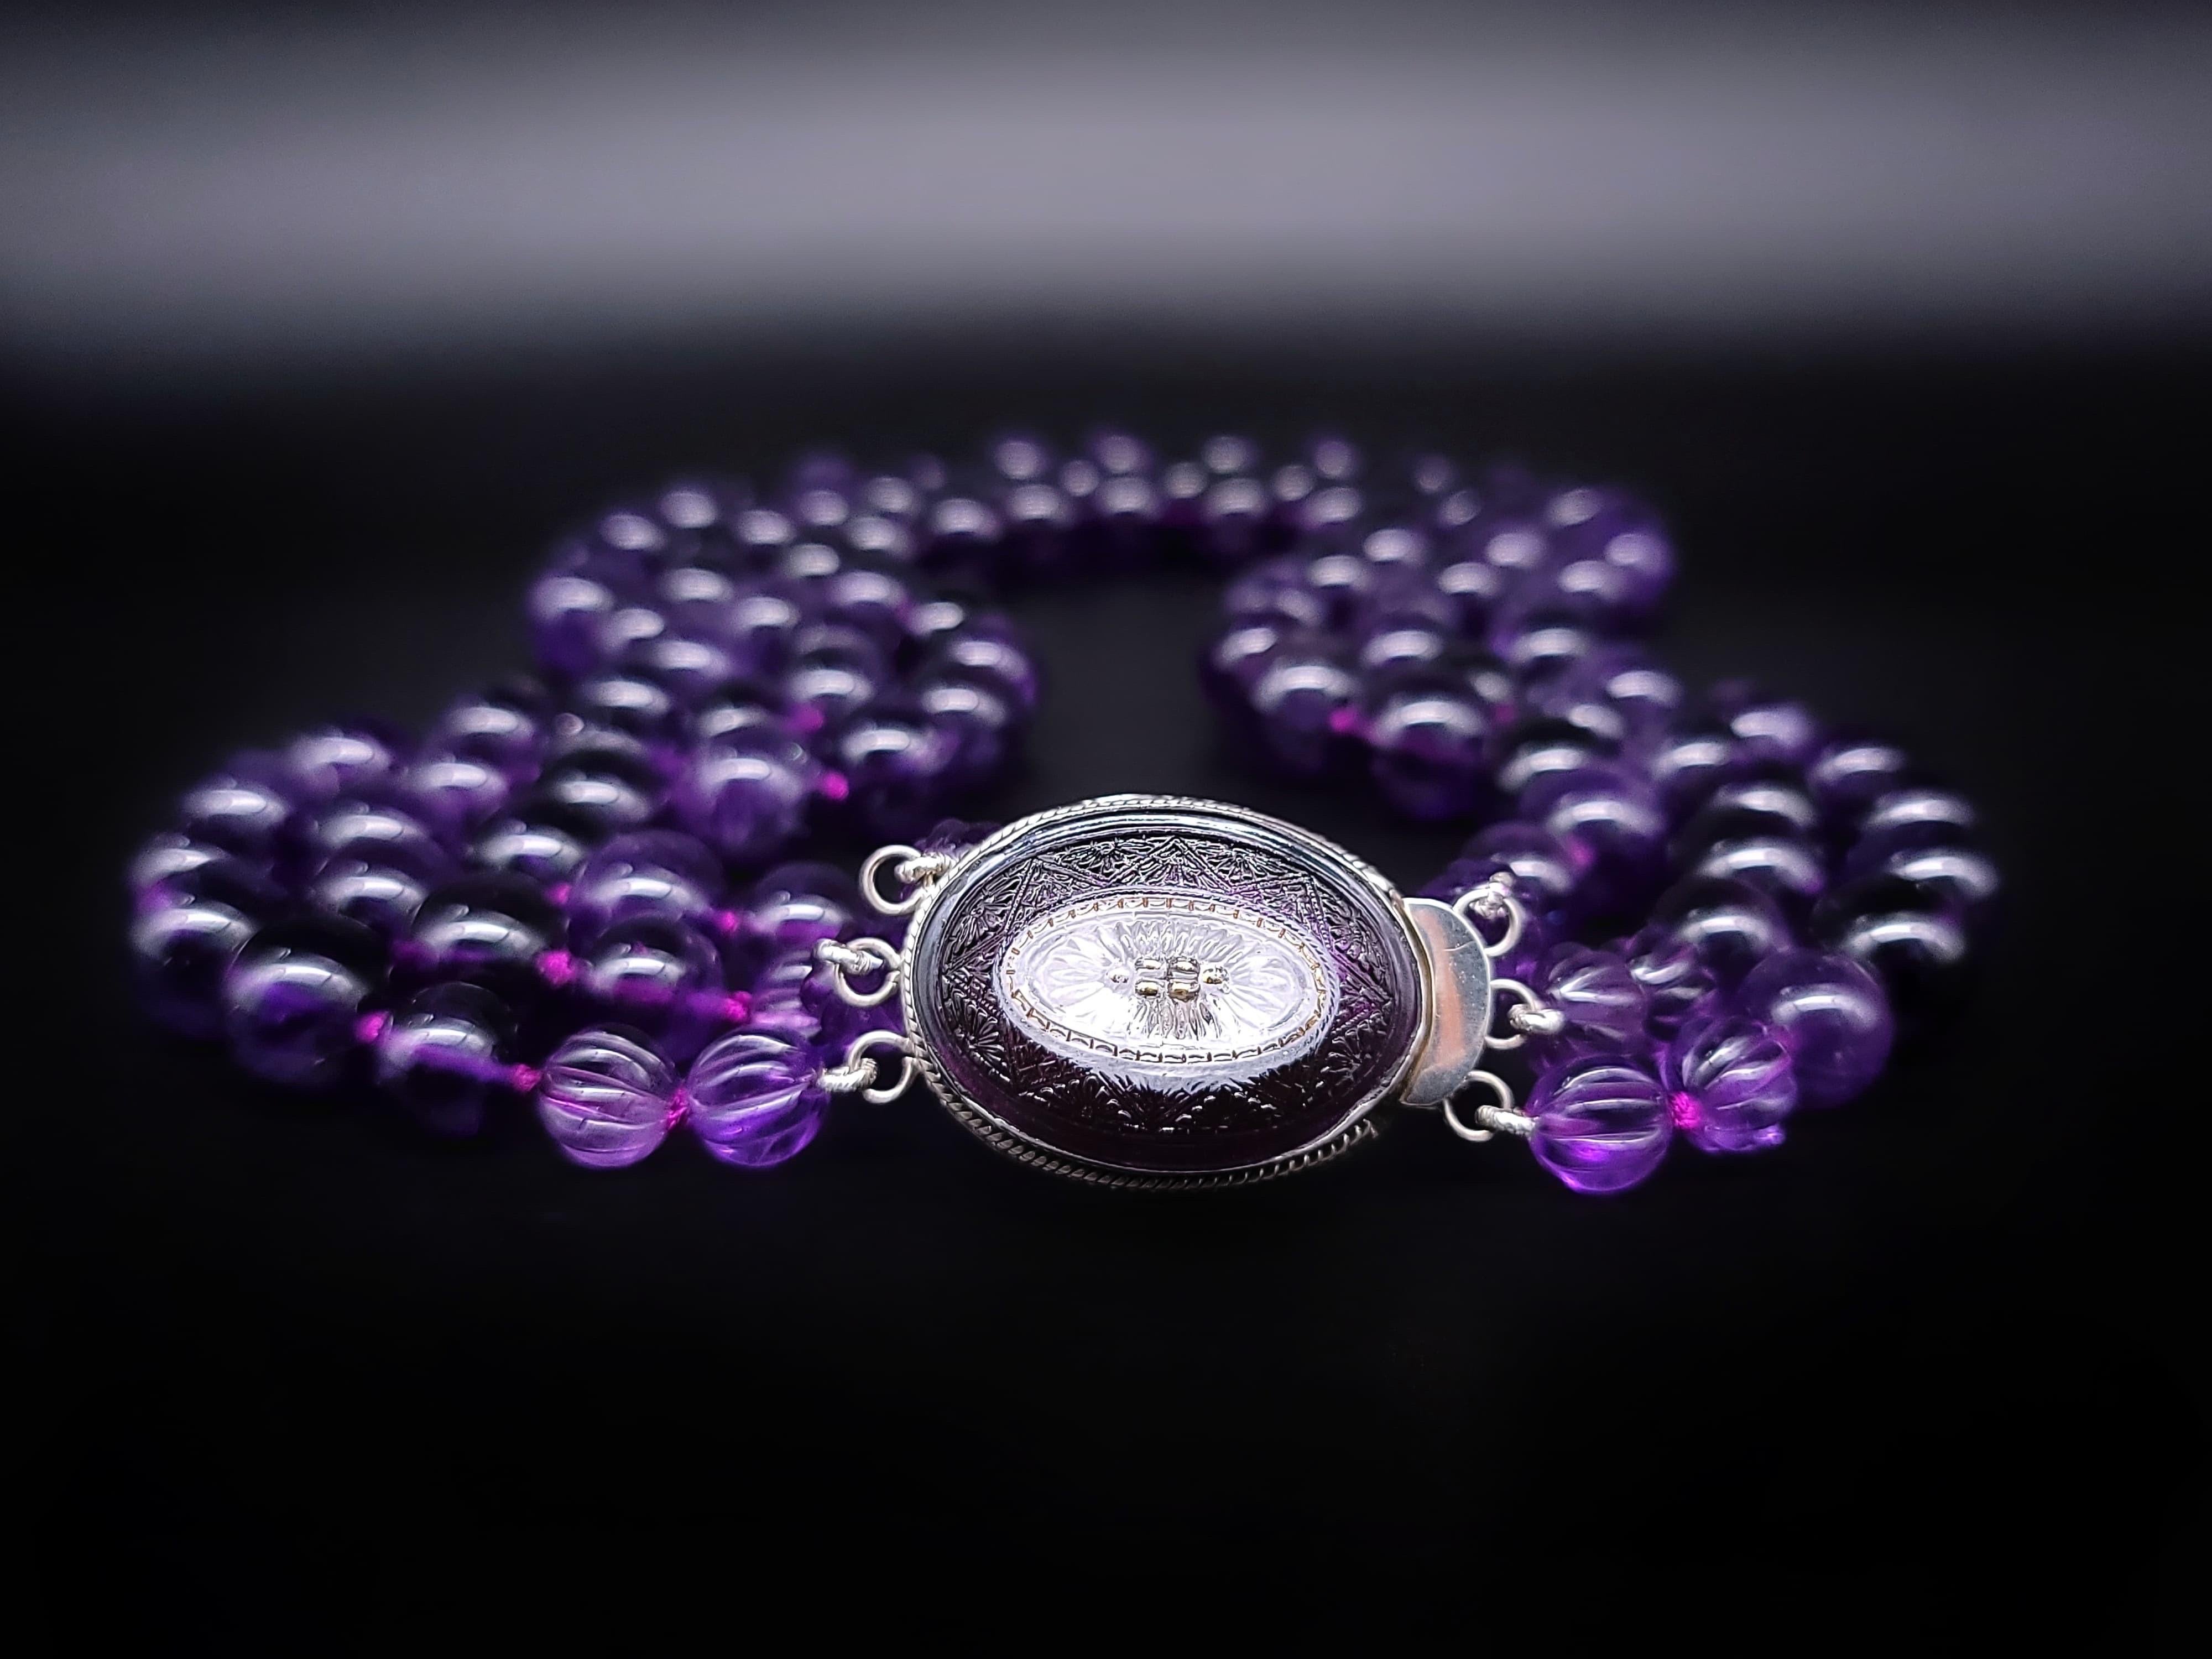 A.Jeschel  Amethyst necklace with a Vintage Venetian glass clasp. 3